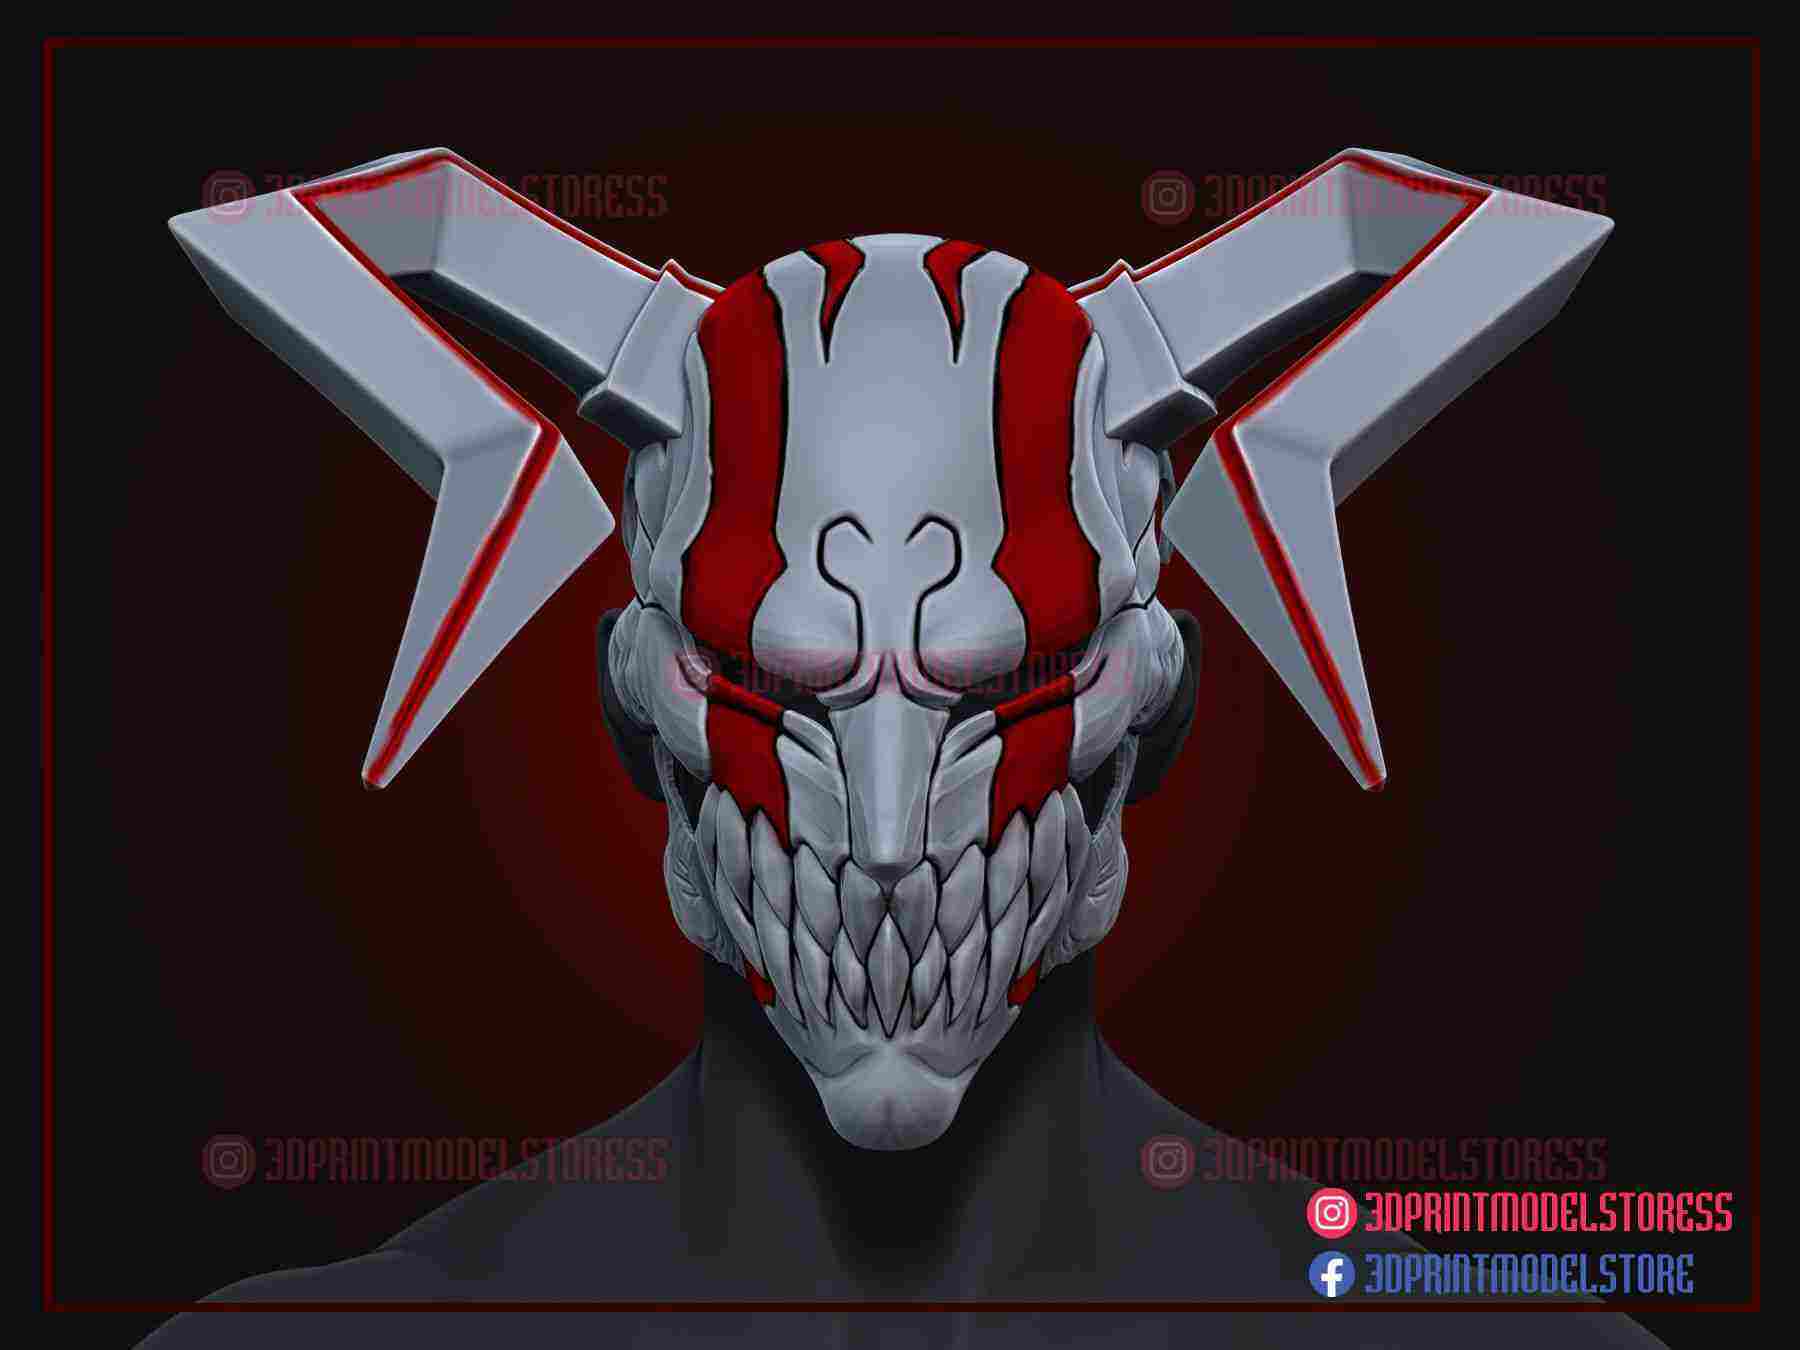 3D Print of The Whole Hollow Mask by 3DPrintModelStore